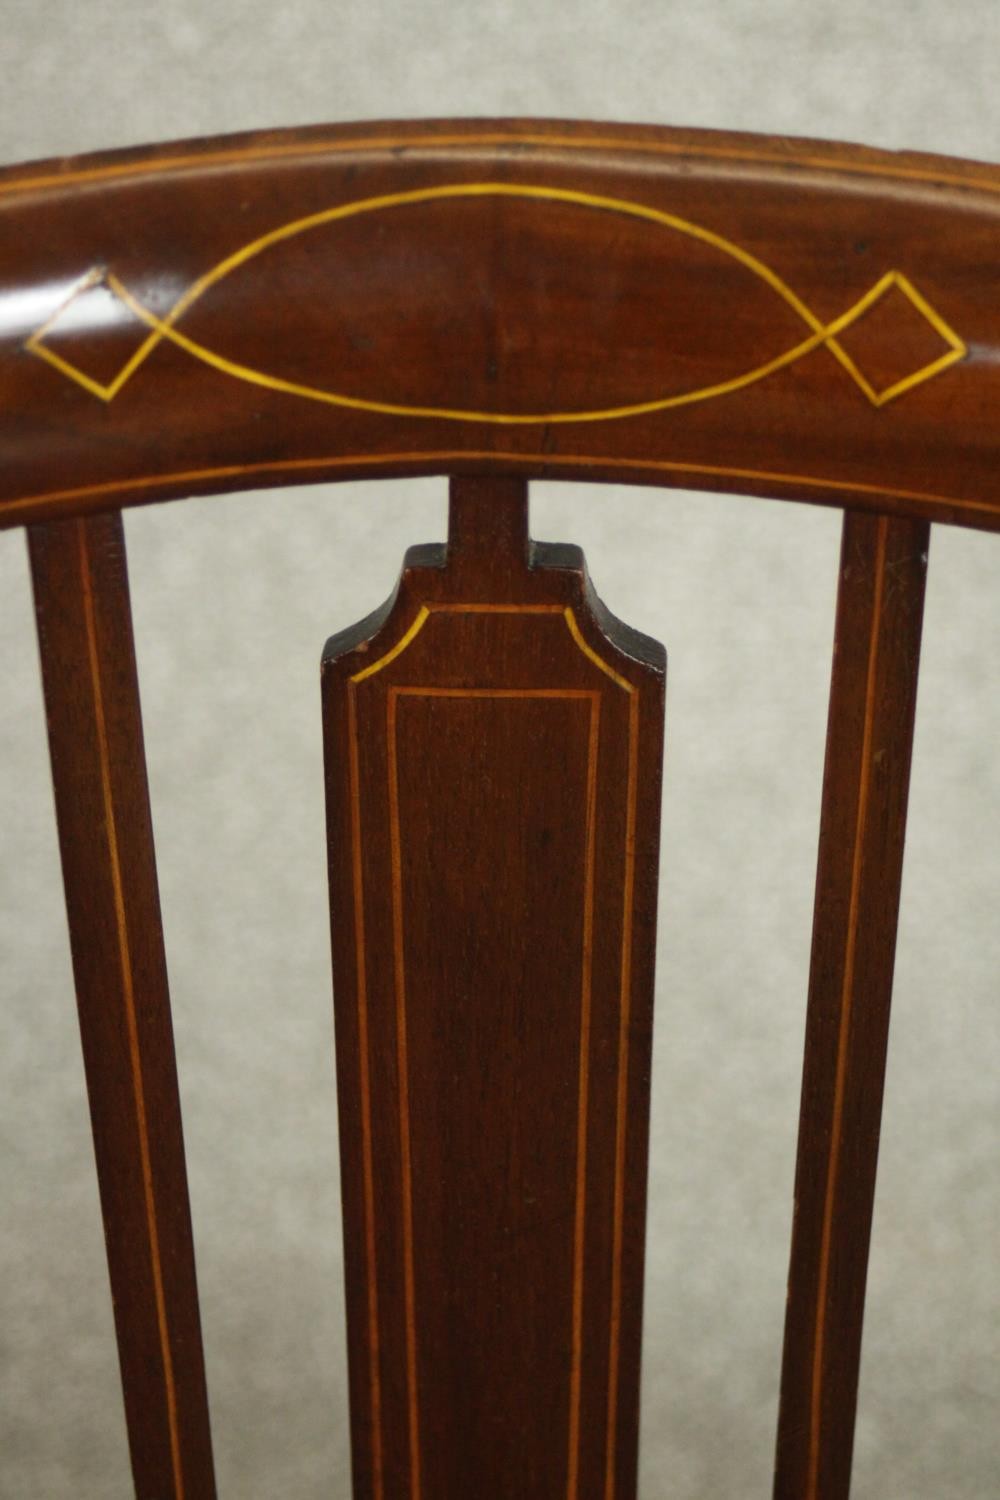 An Edwardian mahogany and inlaid tub chair, the serpentine fronted seat upholstered in dark grey - Image 5 of 7